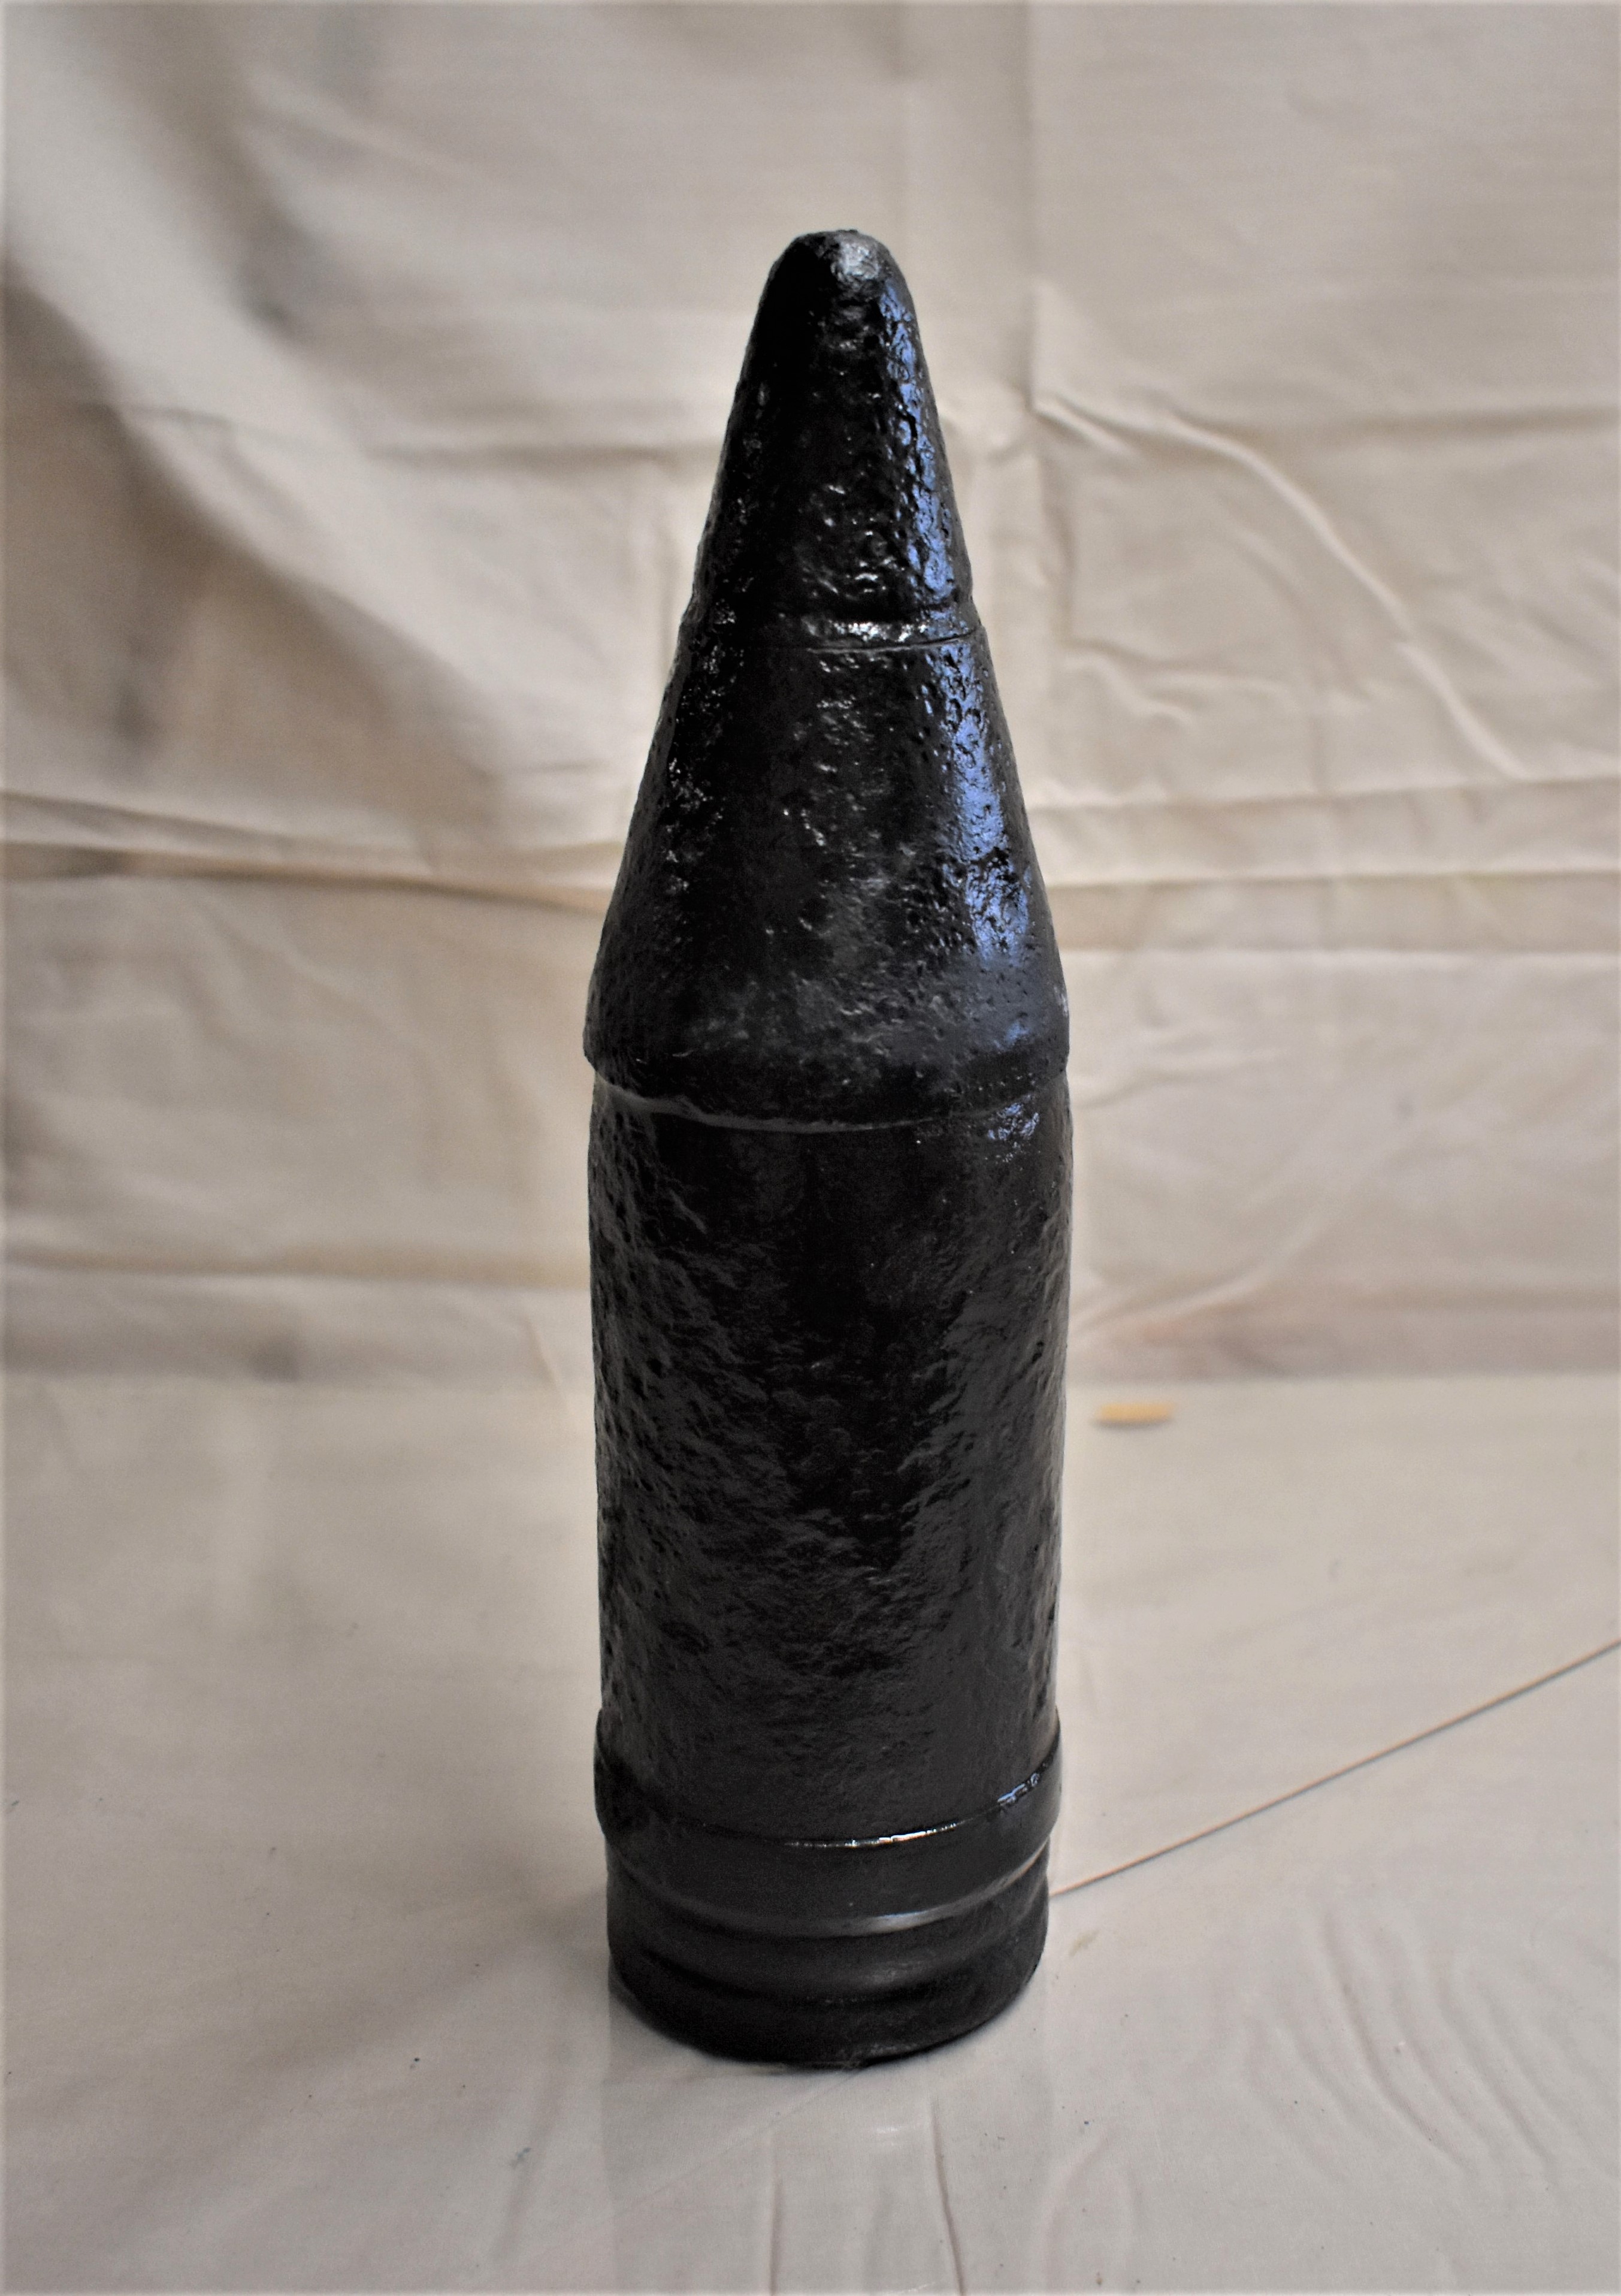 German WWII A.P. Projectile with Ballistic Cap and Piercing Cap, Type 39, 75-mm Pzgr. Pair. 39 PAK